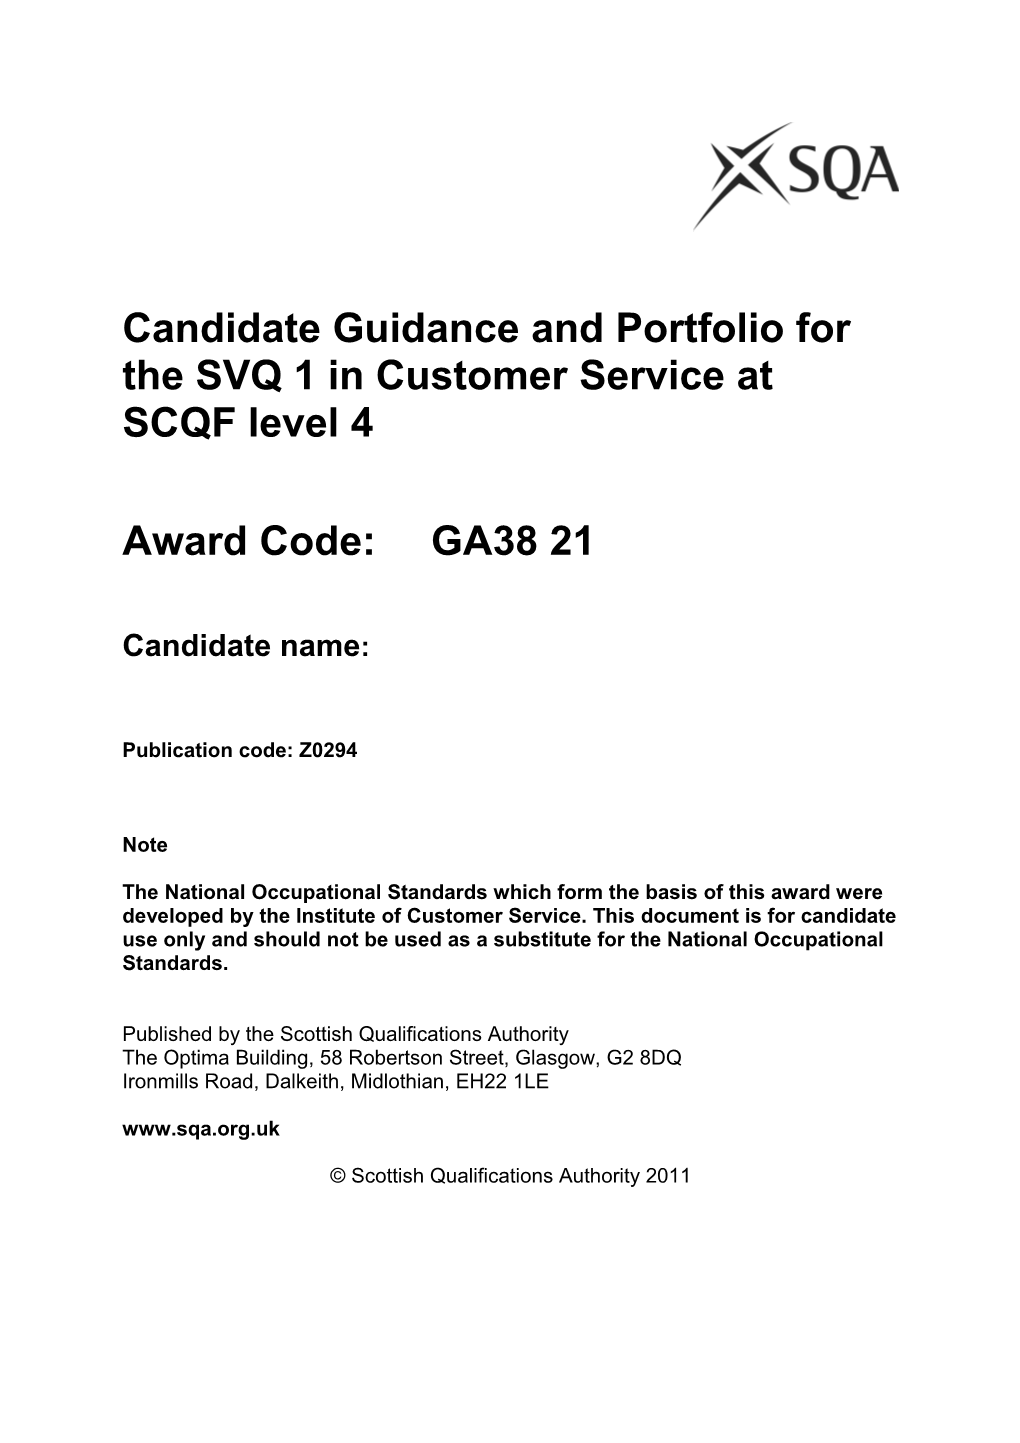 Candidate Guidance and Portfolio for the SVQ 1Incustomer Service at SCQF Level 4